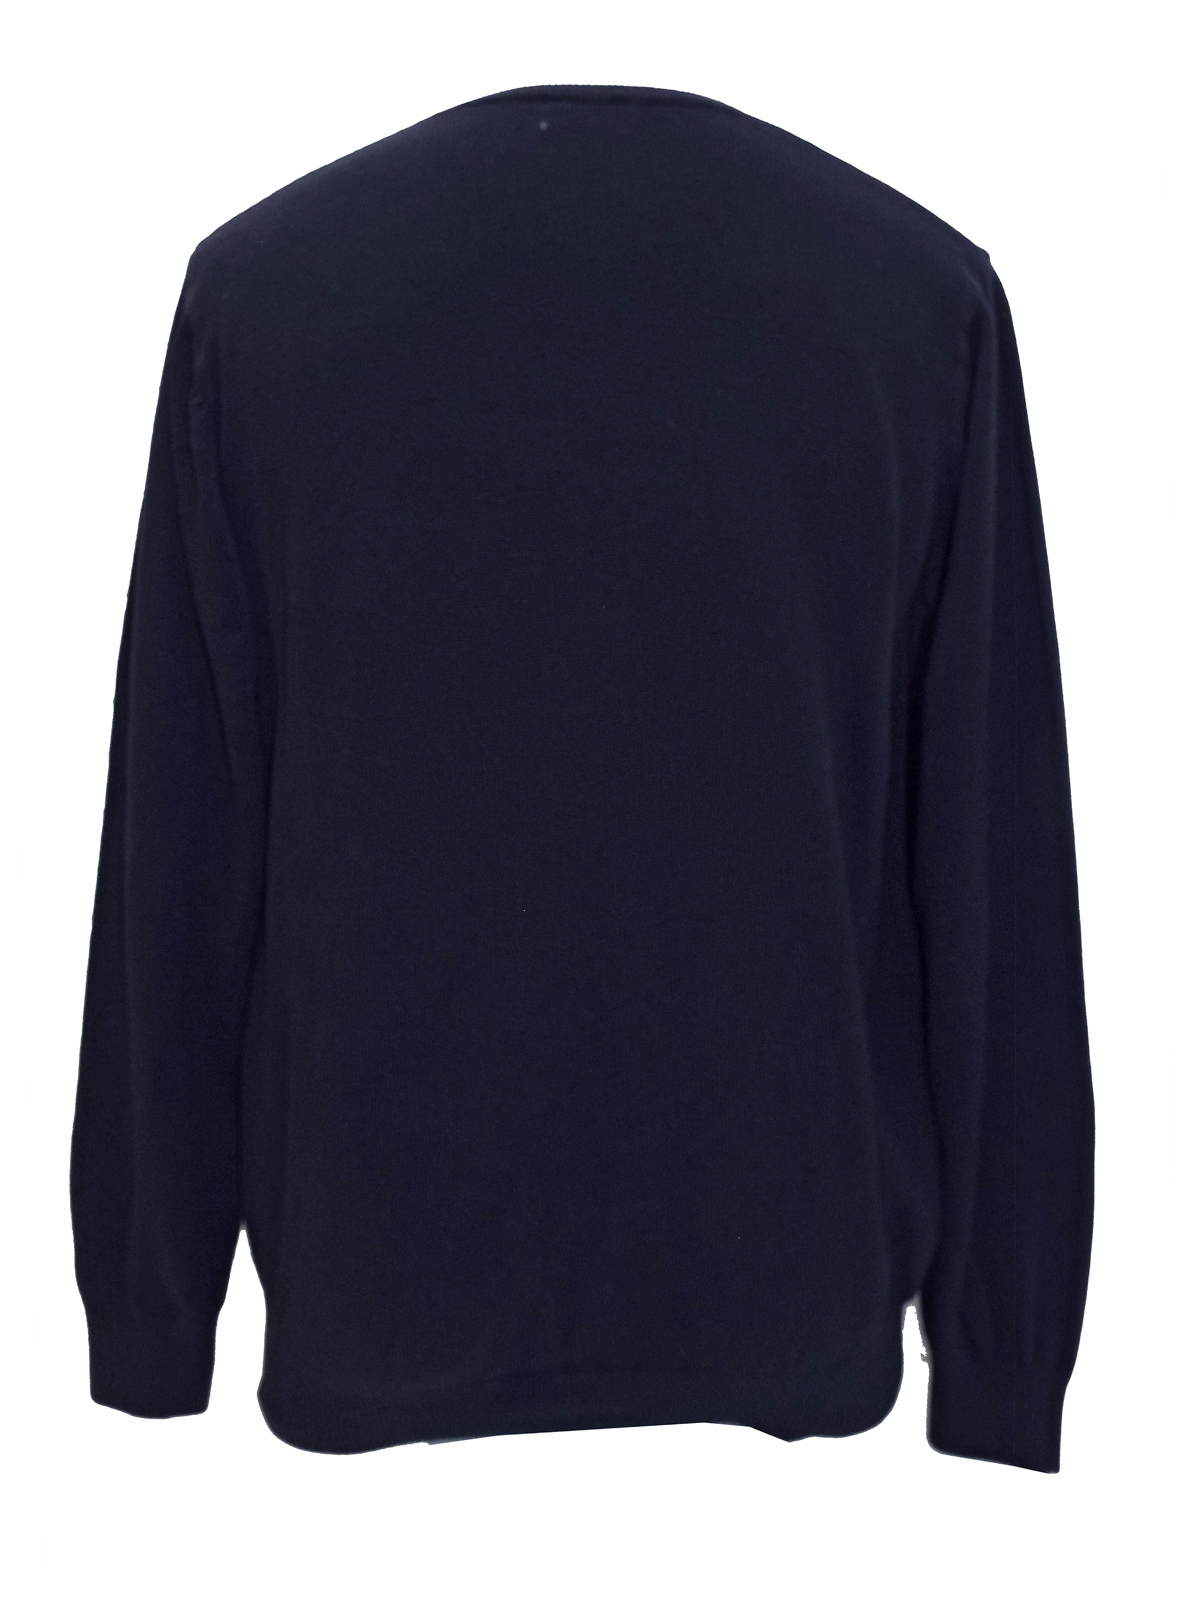 Marks and Spencer - - M&5 Men's NAVY Pure Cotton Crew Neck Tailored Fit ...